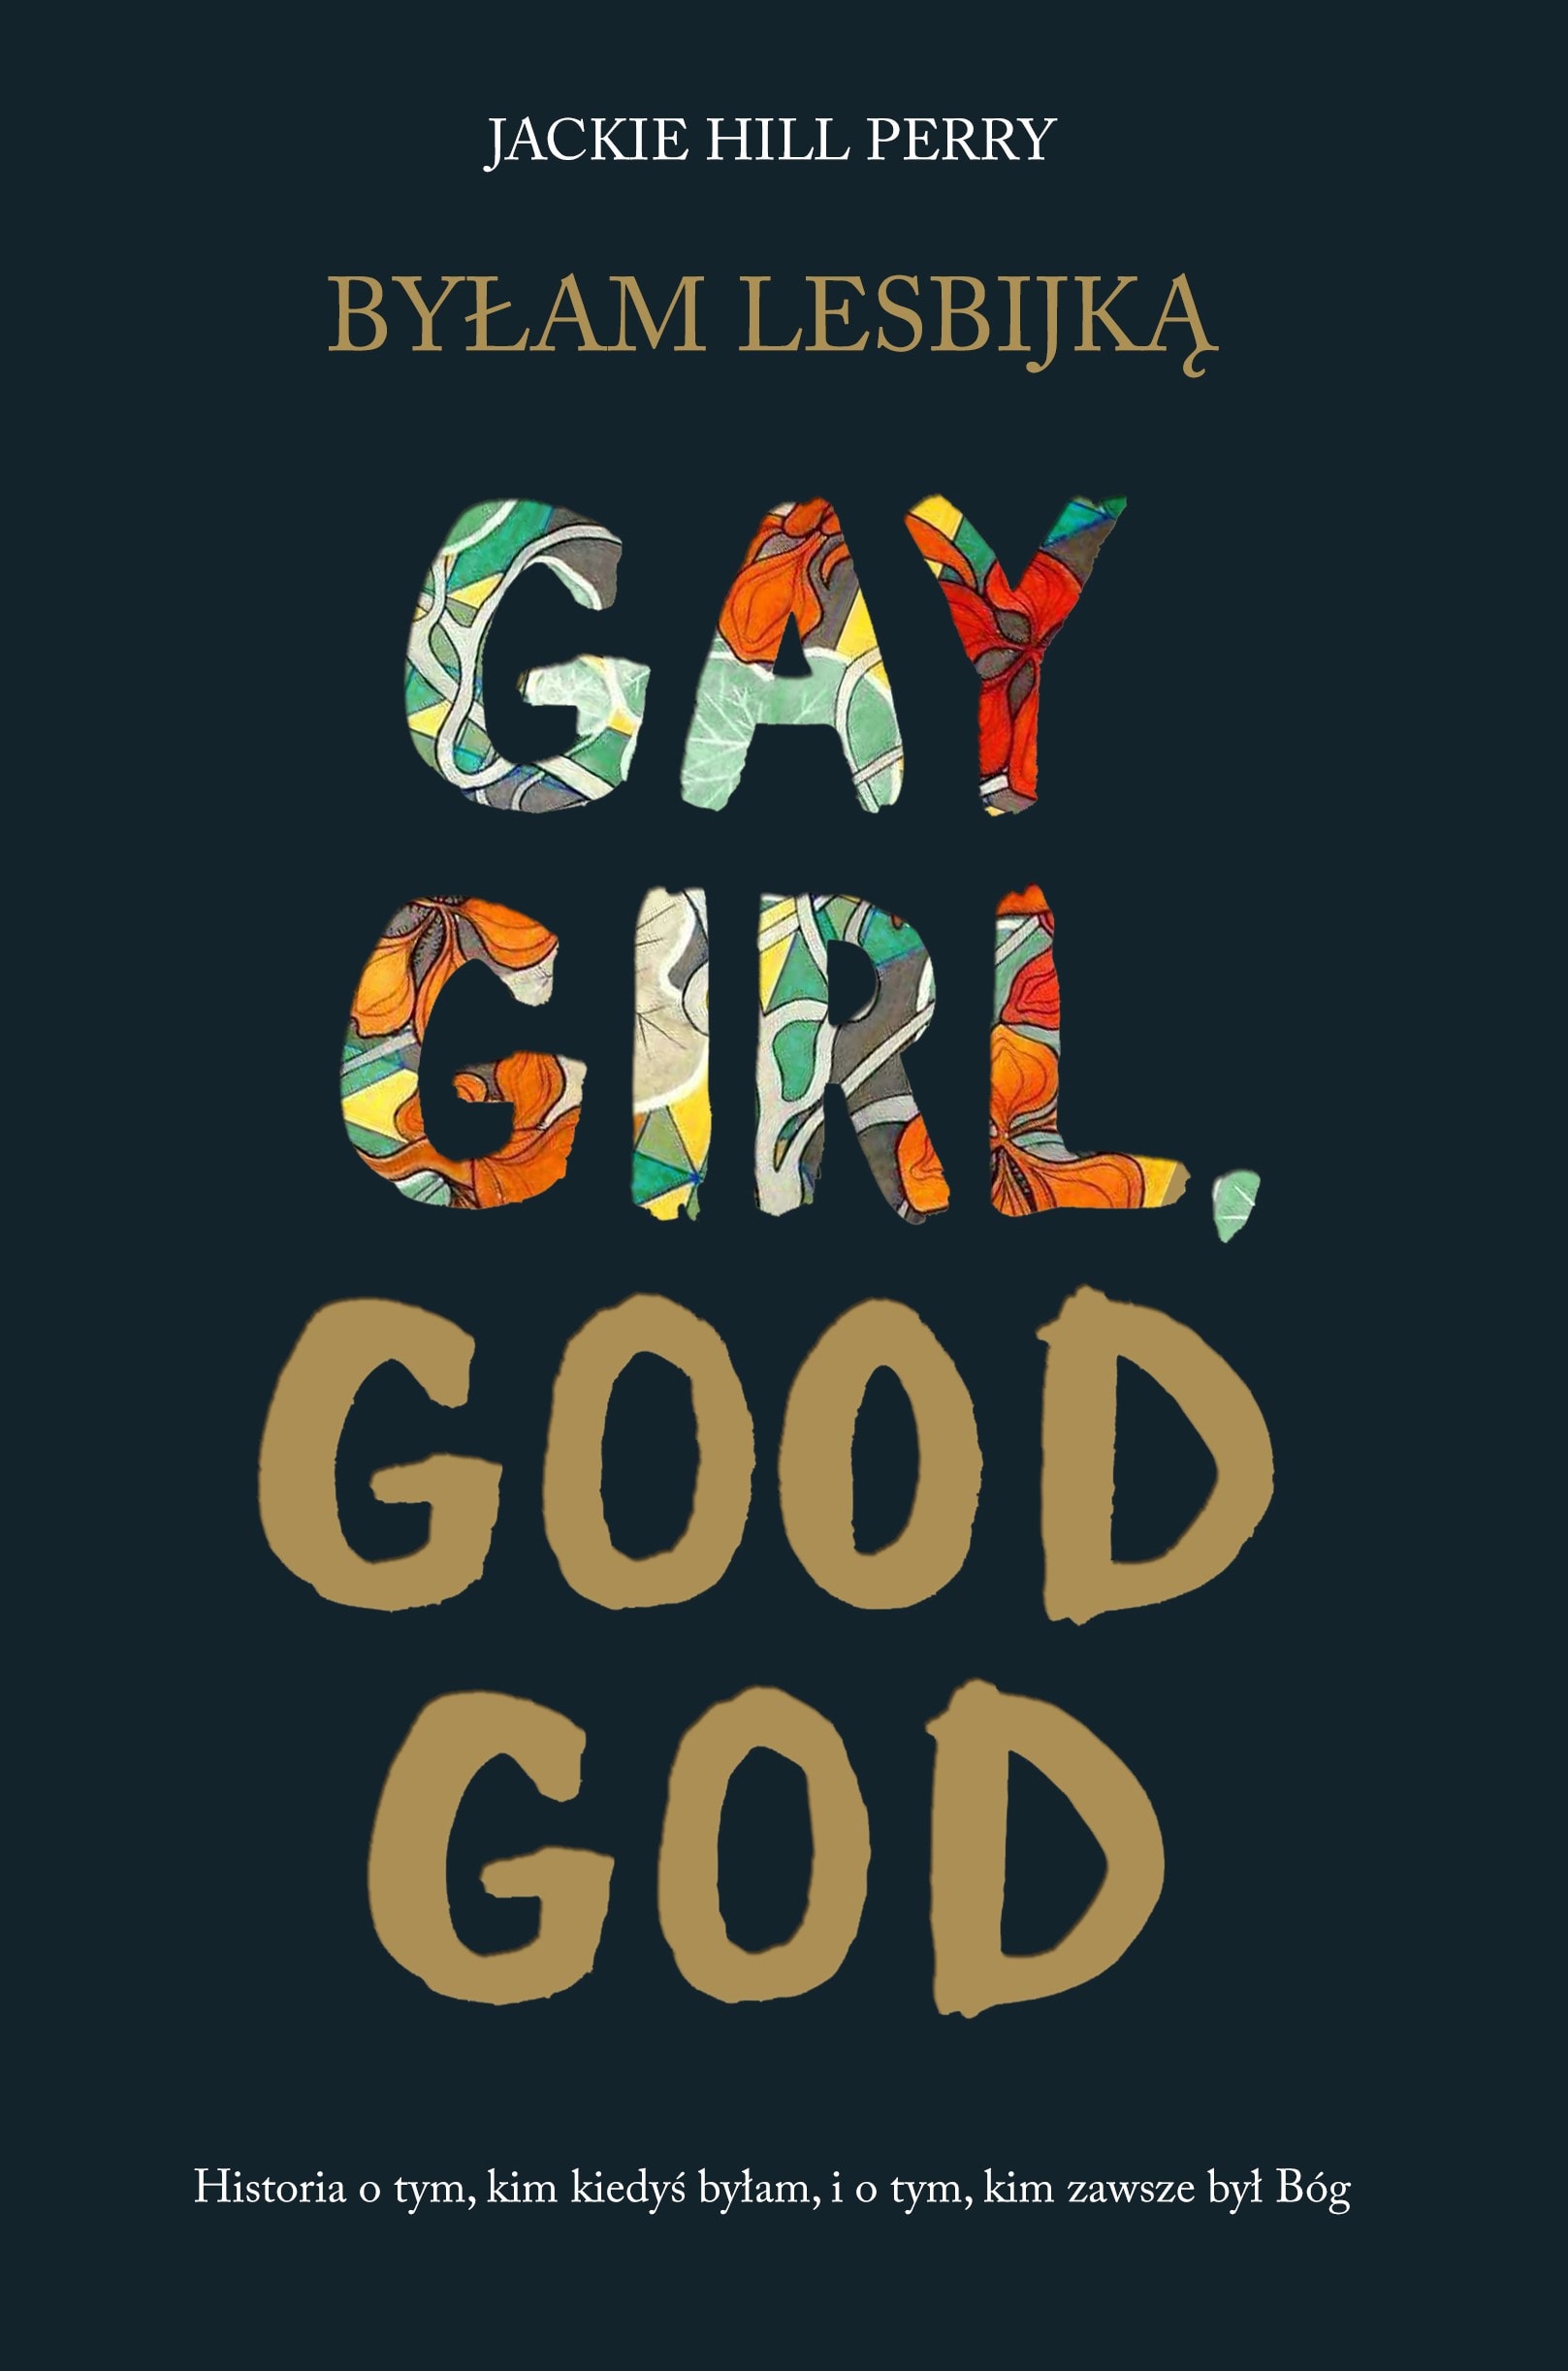 Gay Girl, Good God by Jackie Hill Perry